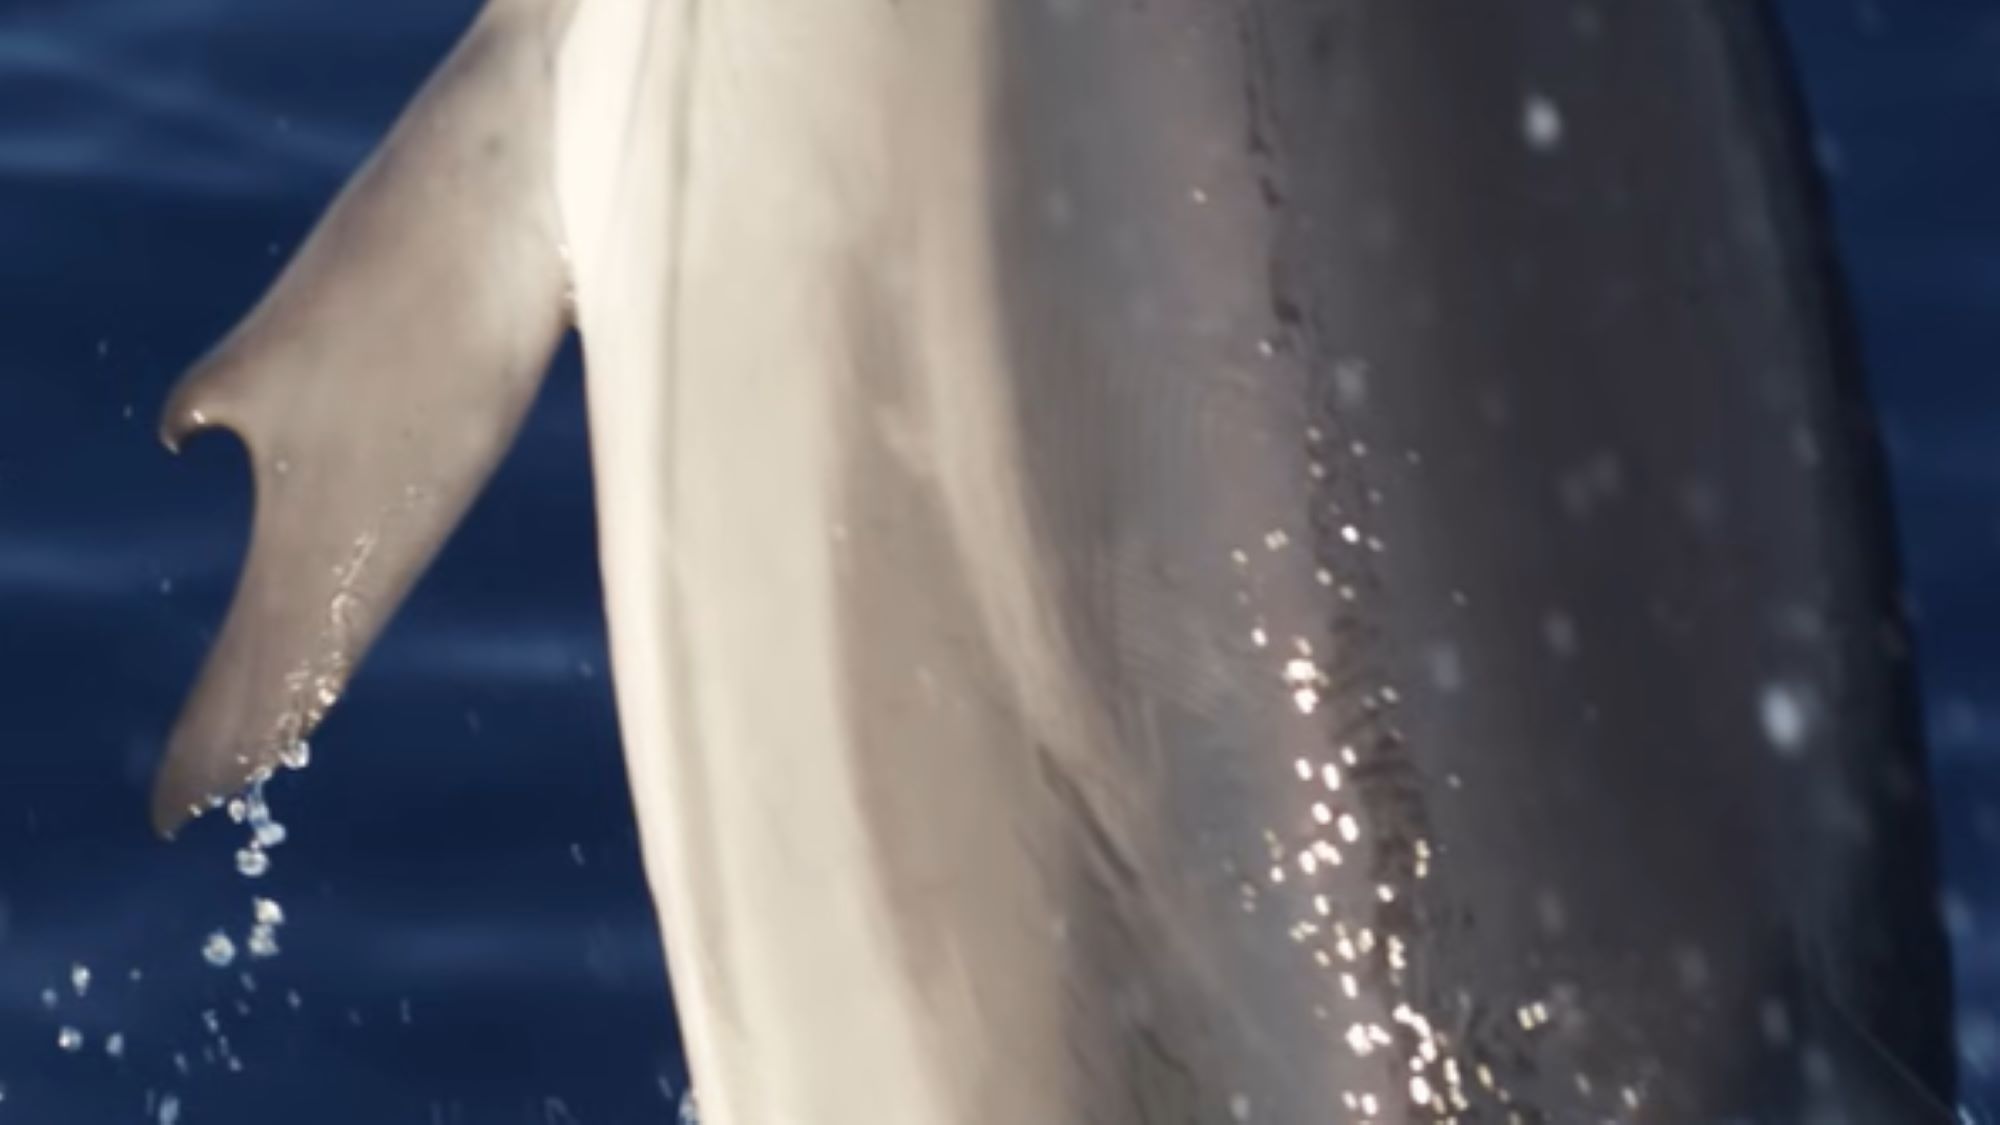 A close up picture of one of the dolphin's flippers.